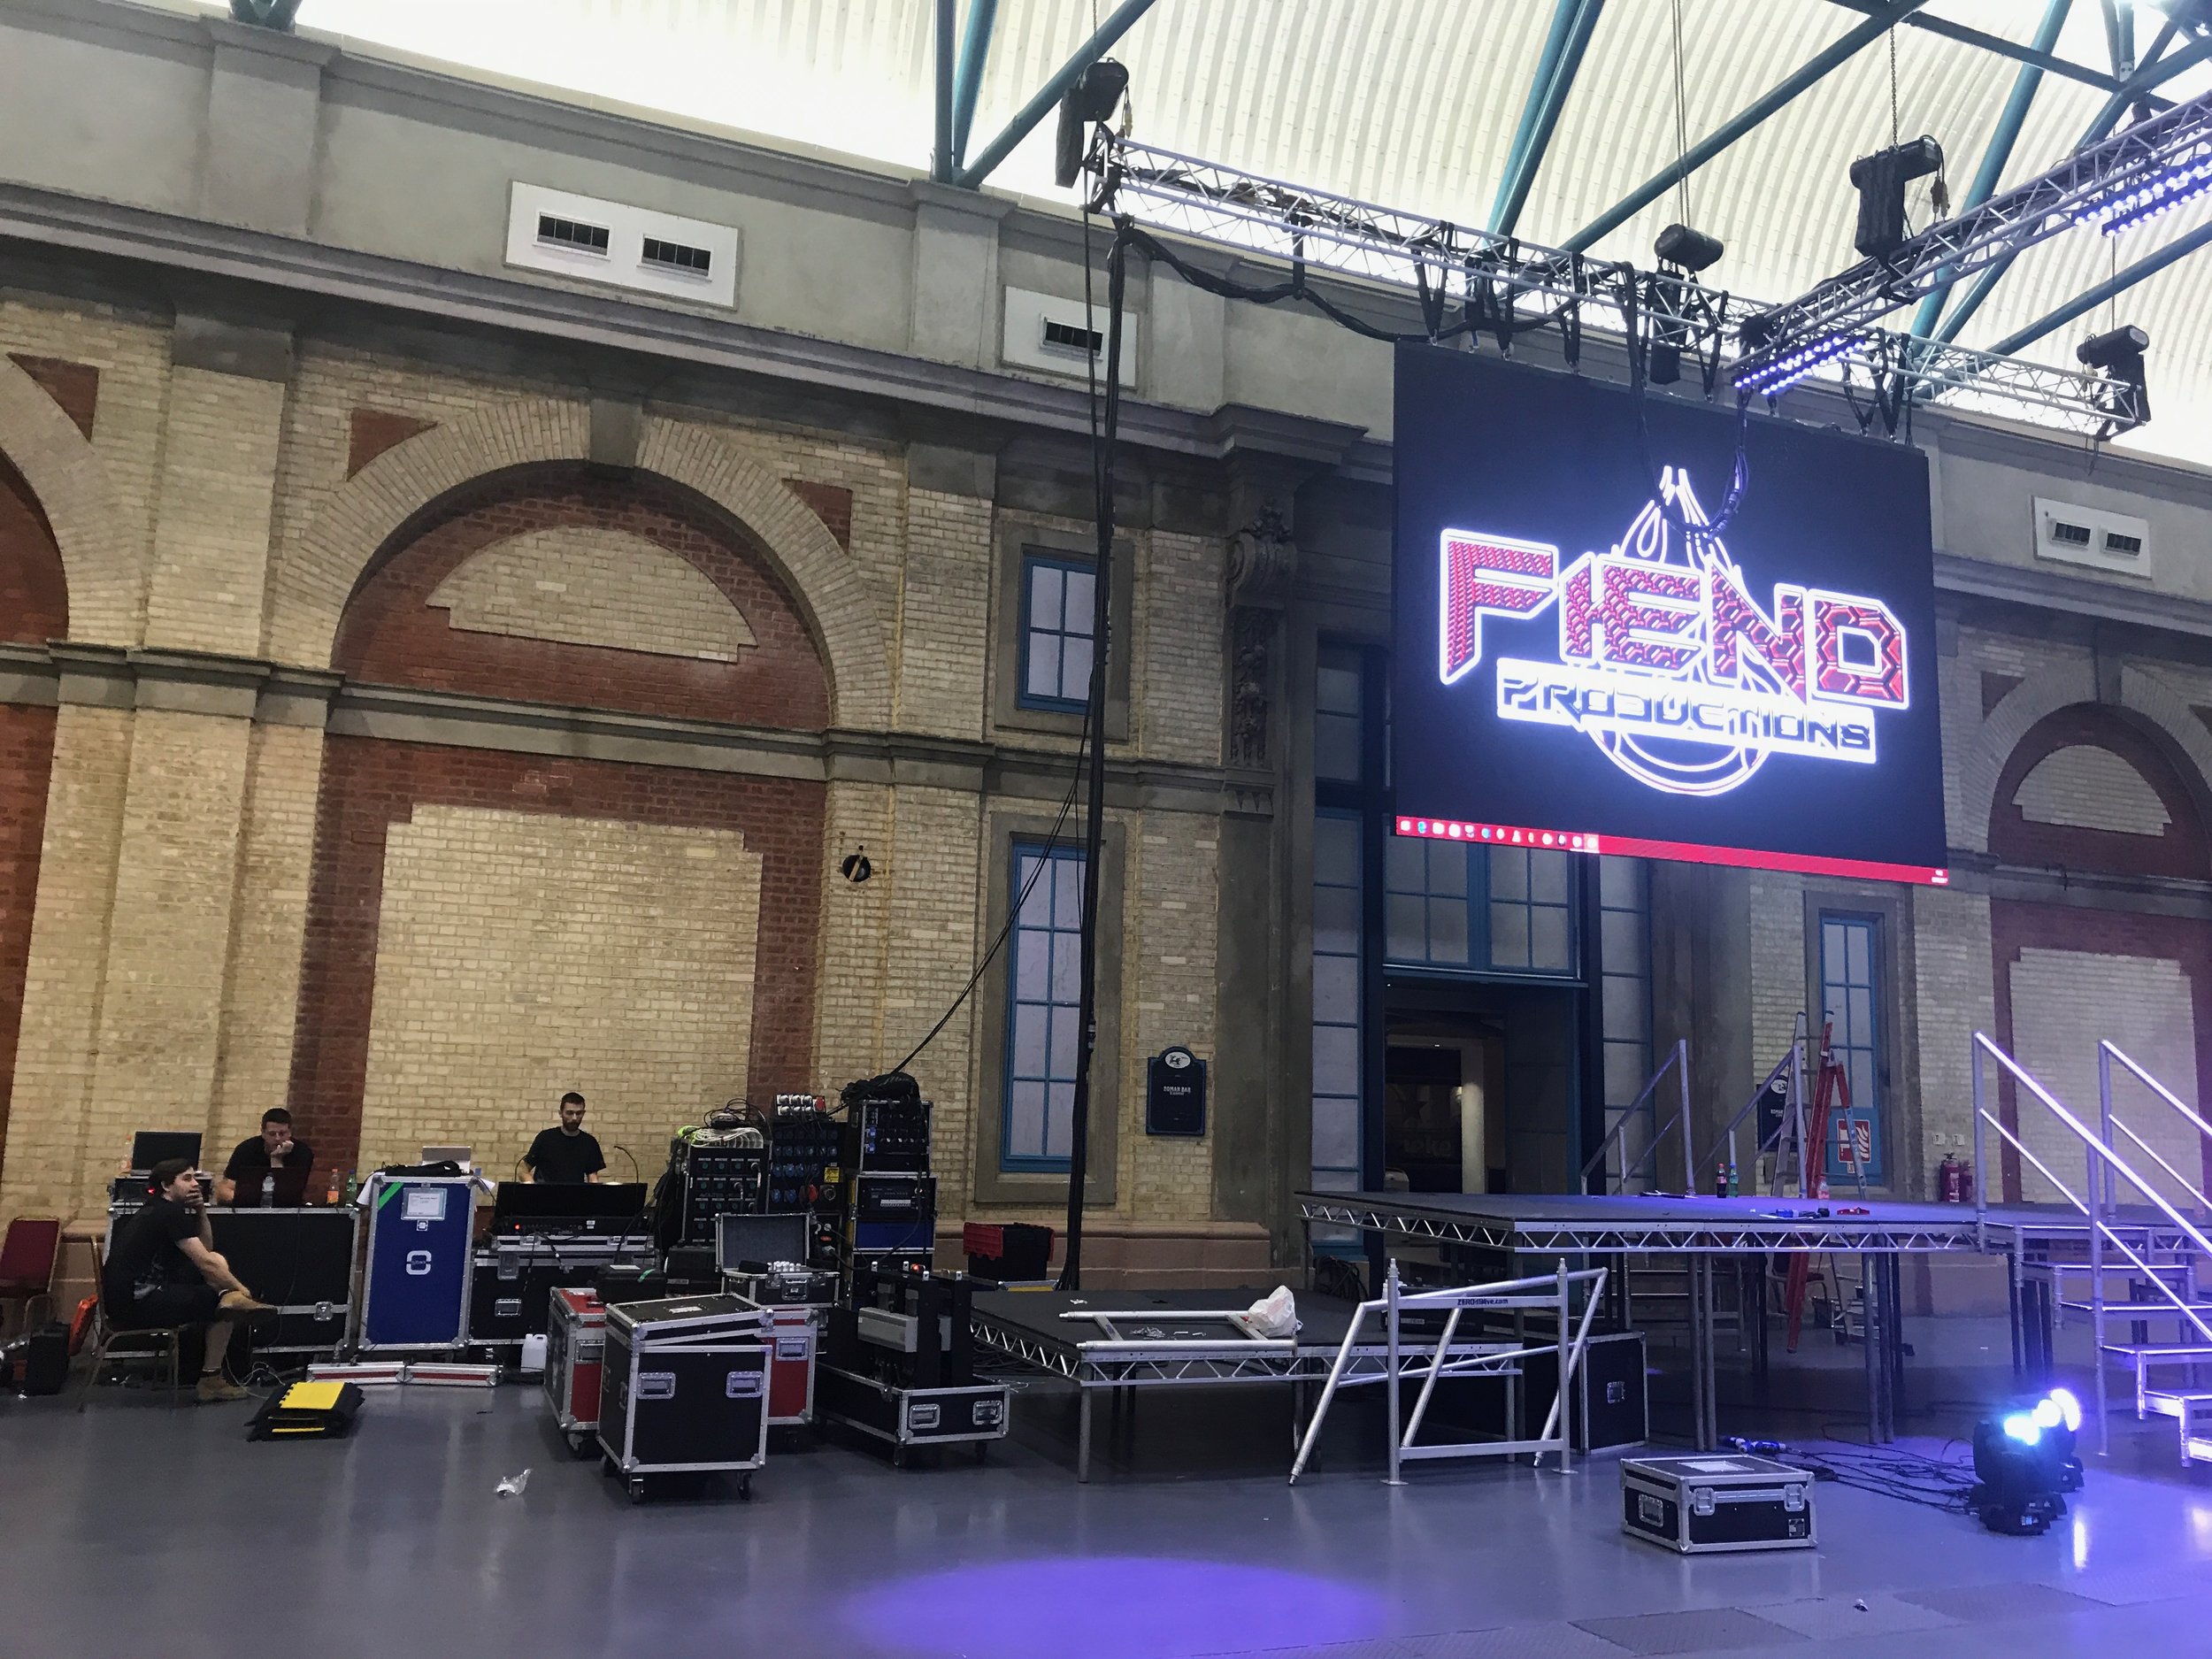 Fiend production on LED screen as a test.